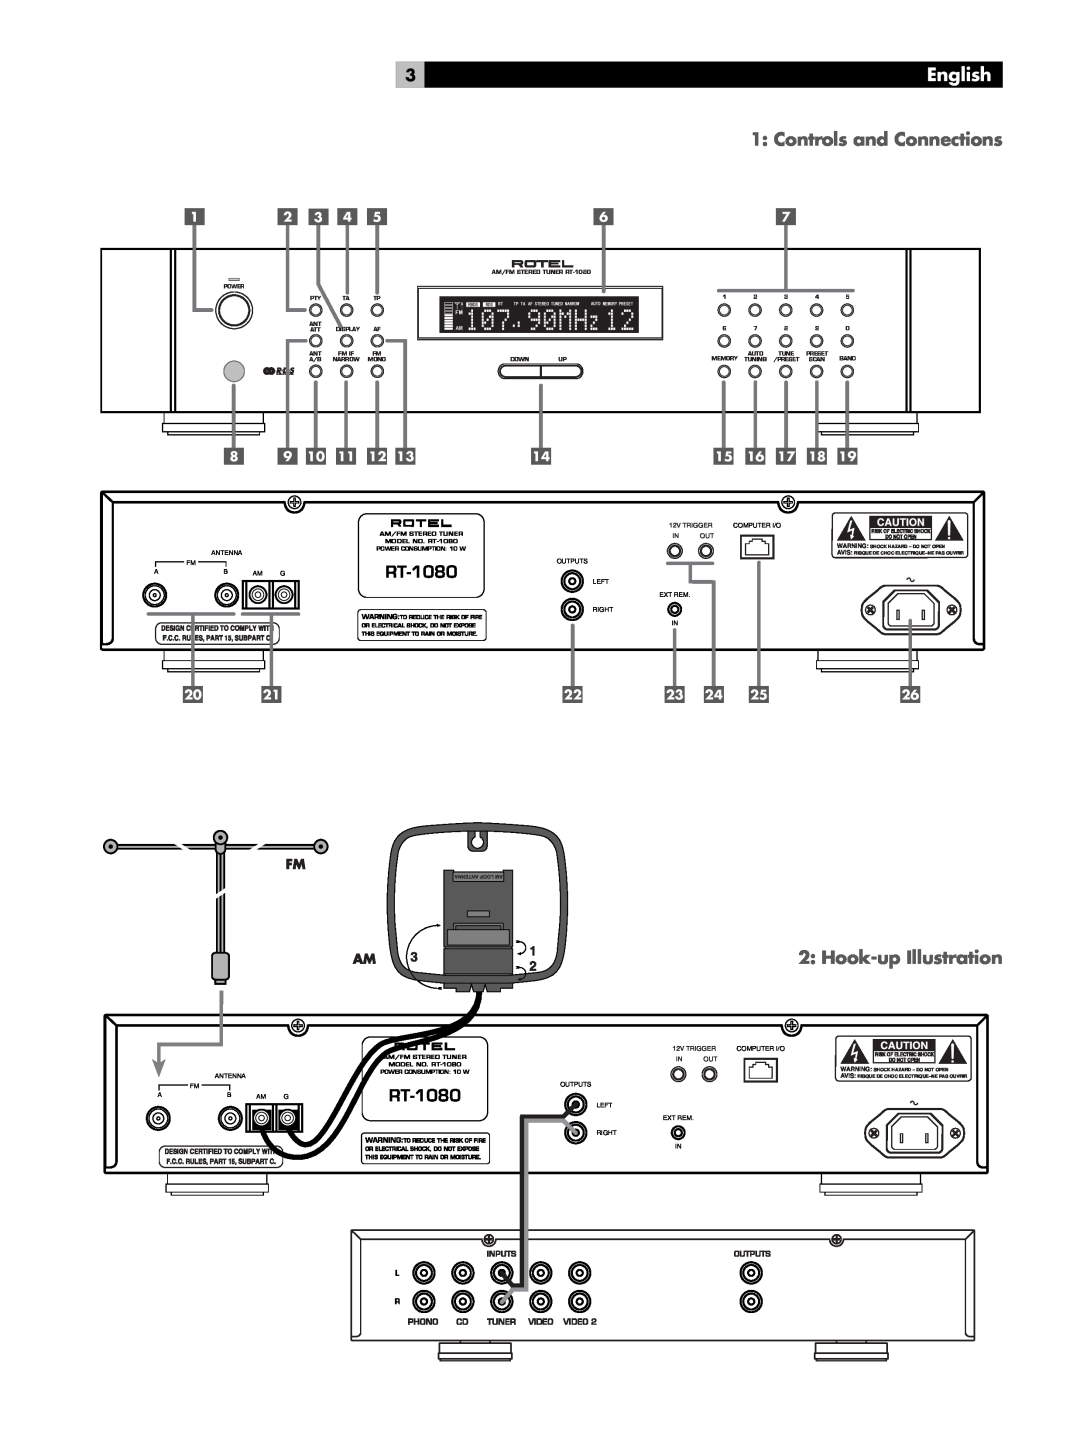 Rotel RT-1080 owner manual English, Controls and Connections, Hook-upIllustration 